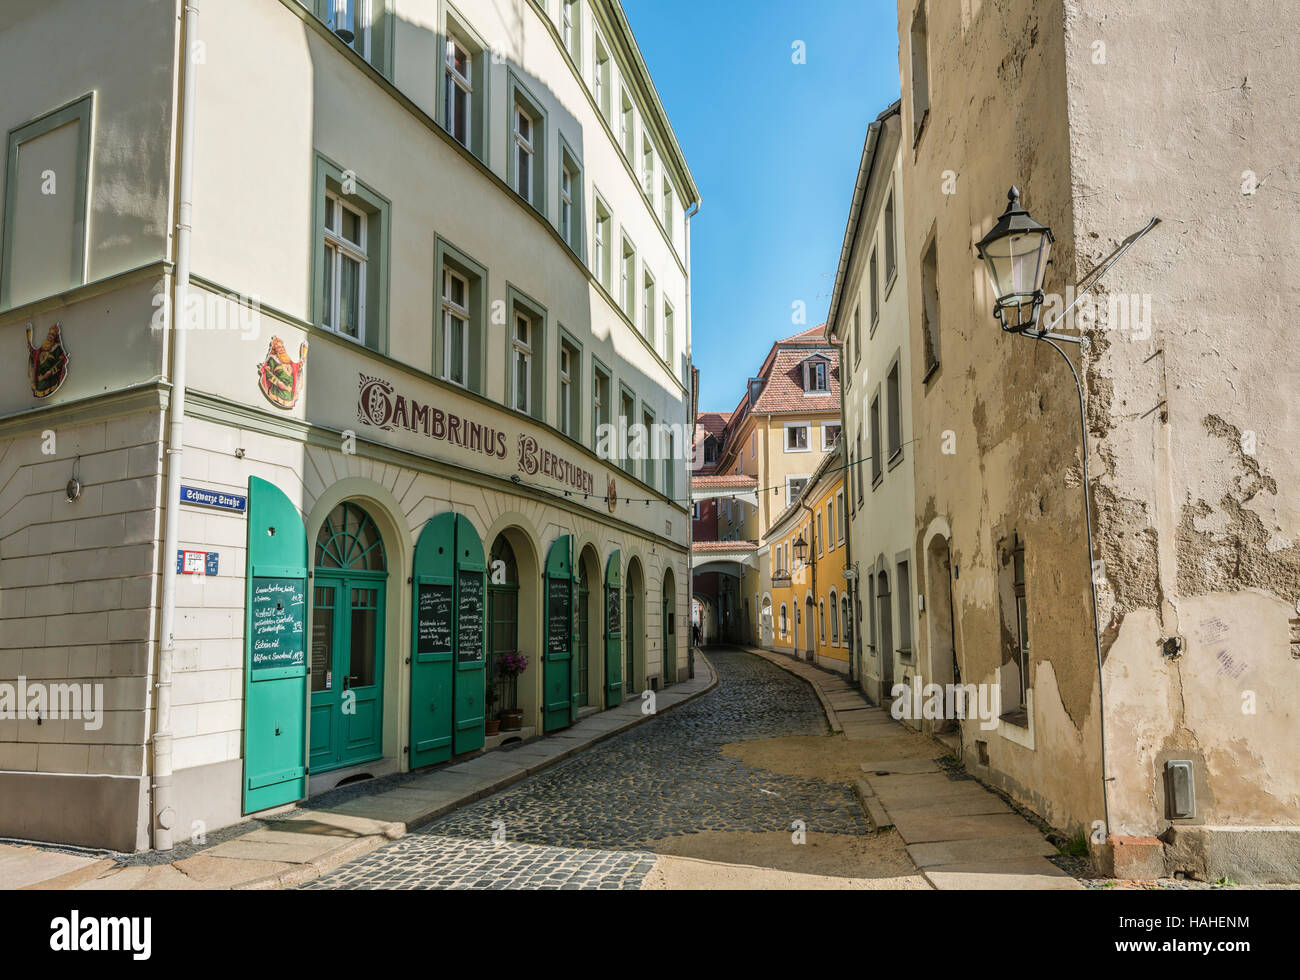 Old town at the Obermarkt of Goerlitz, Saxony, Germany Stock Photo